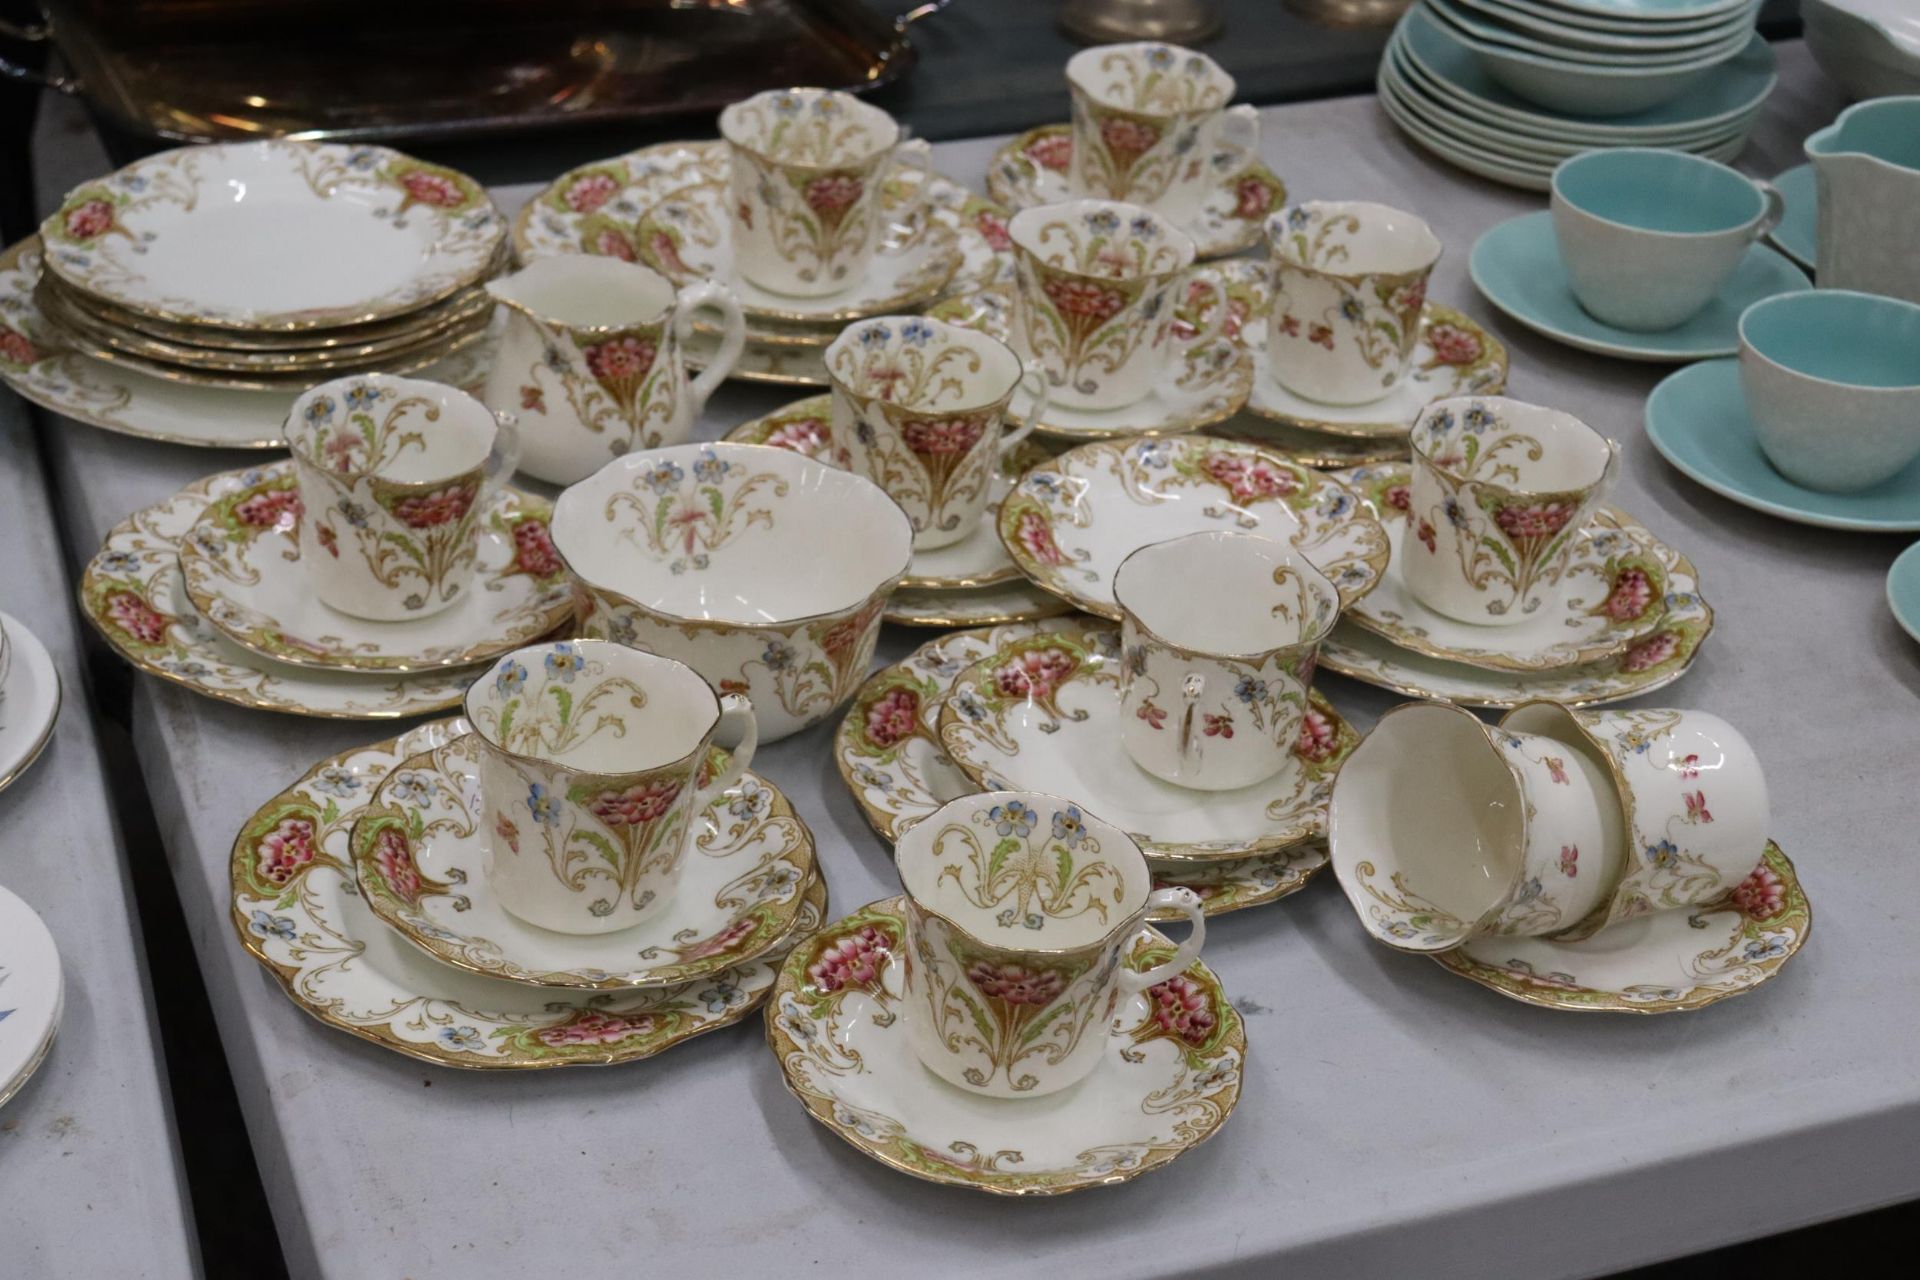 A LATE 18TH/EARLY 19TH CENTURY TEASET BY FRED B PEARCE & CO, LONDON, TO INCLUDE CAKE PLATES, A CREAM